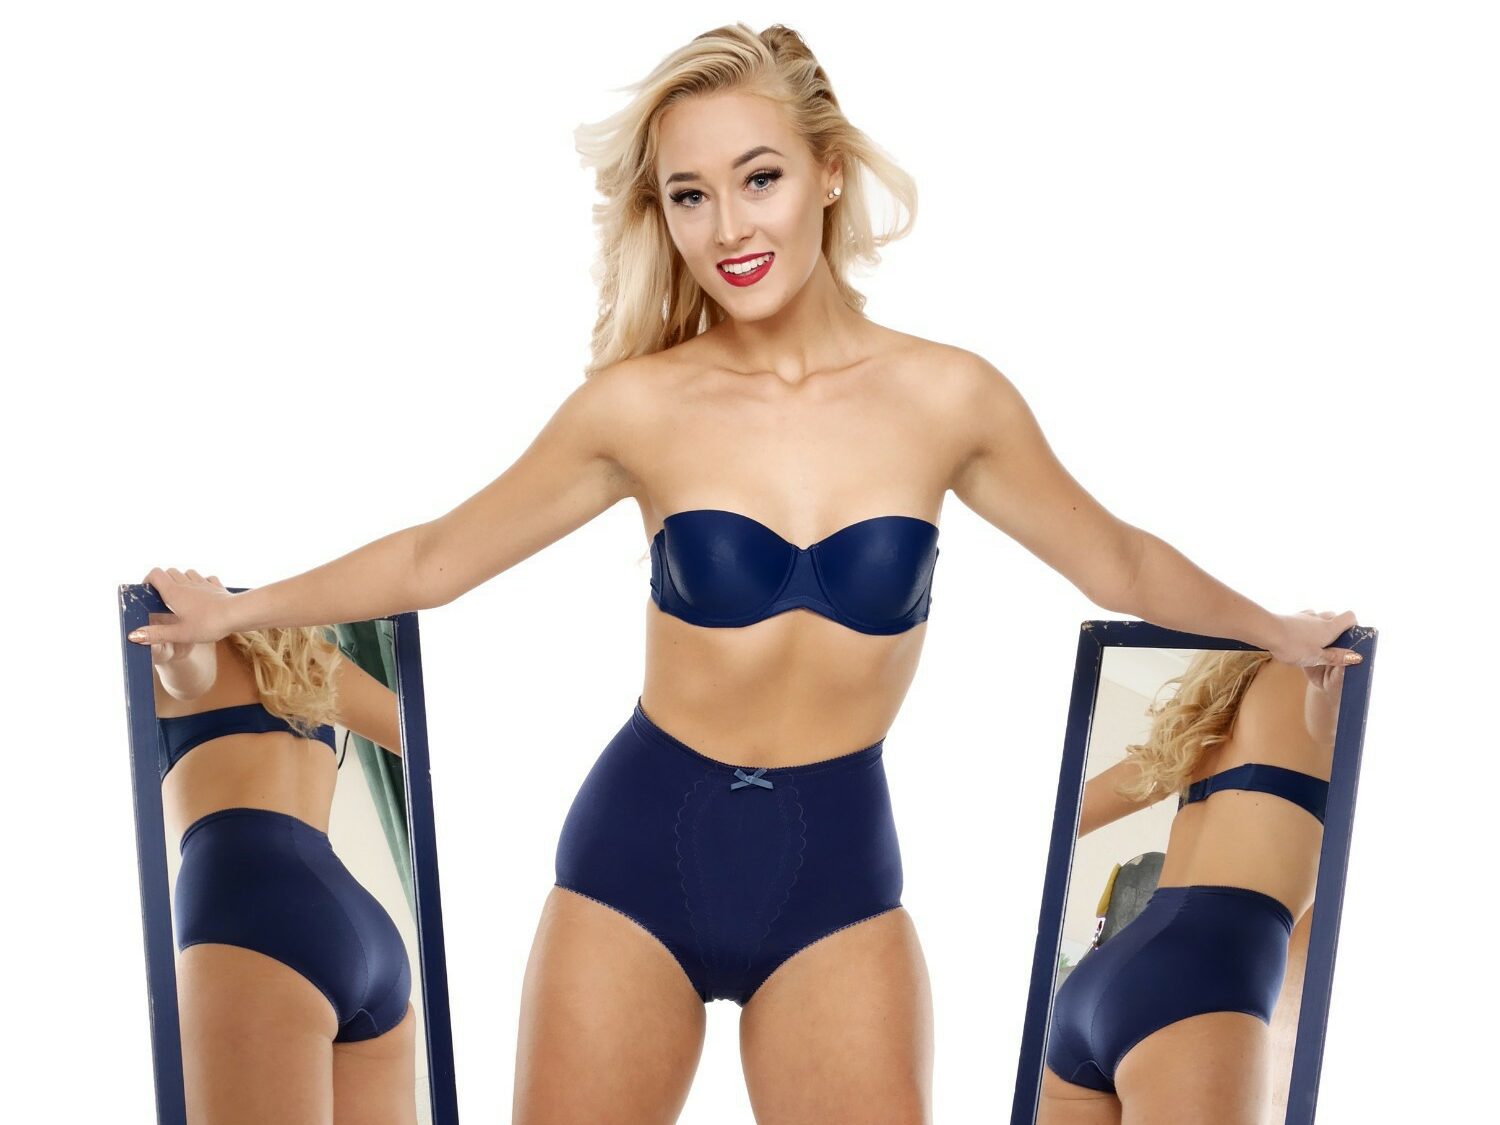 2016-11-06 Fleur in blue vintage style bra and girdle posing with blue 120 cm mirrors.